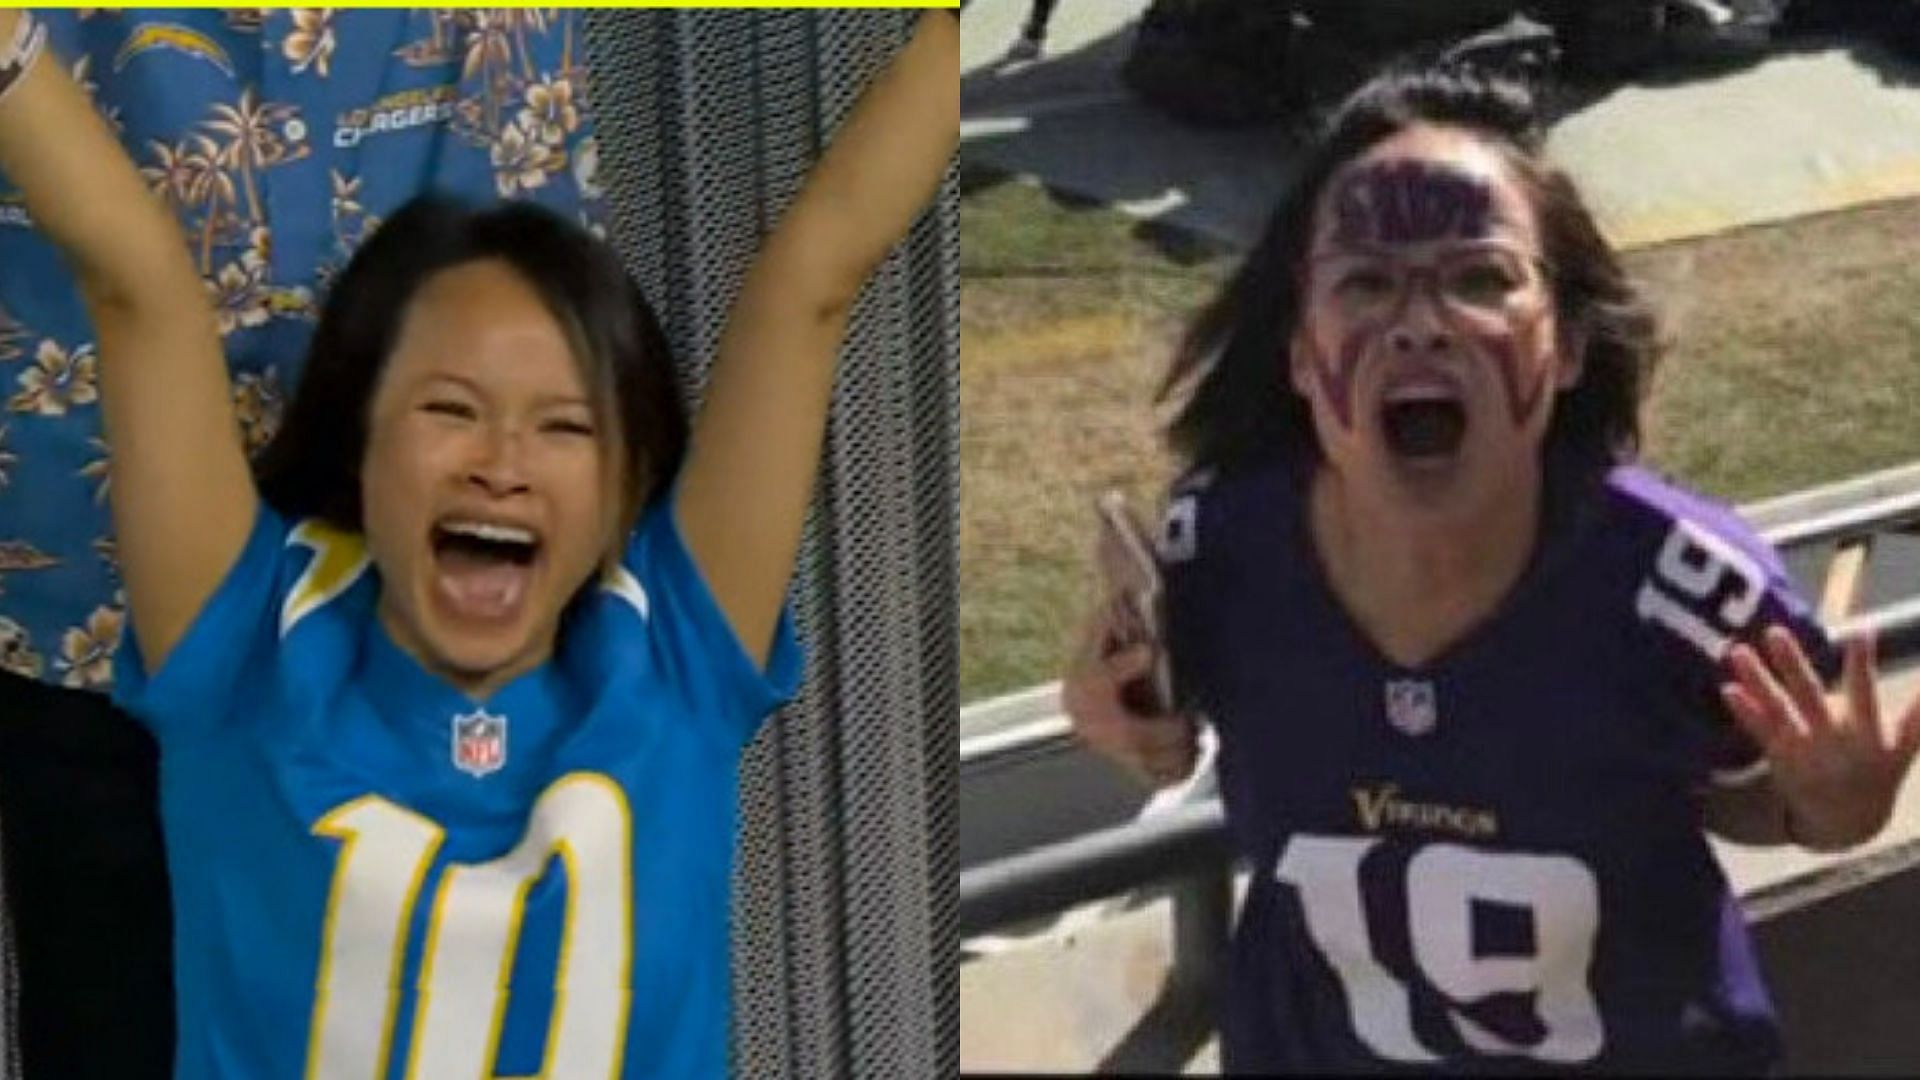 The recently viral Marrianne Do wearing Chargers (left) and Vikings (right) jerseys